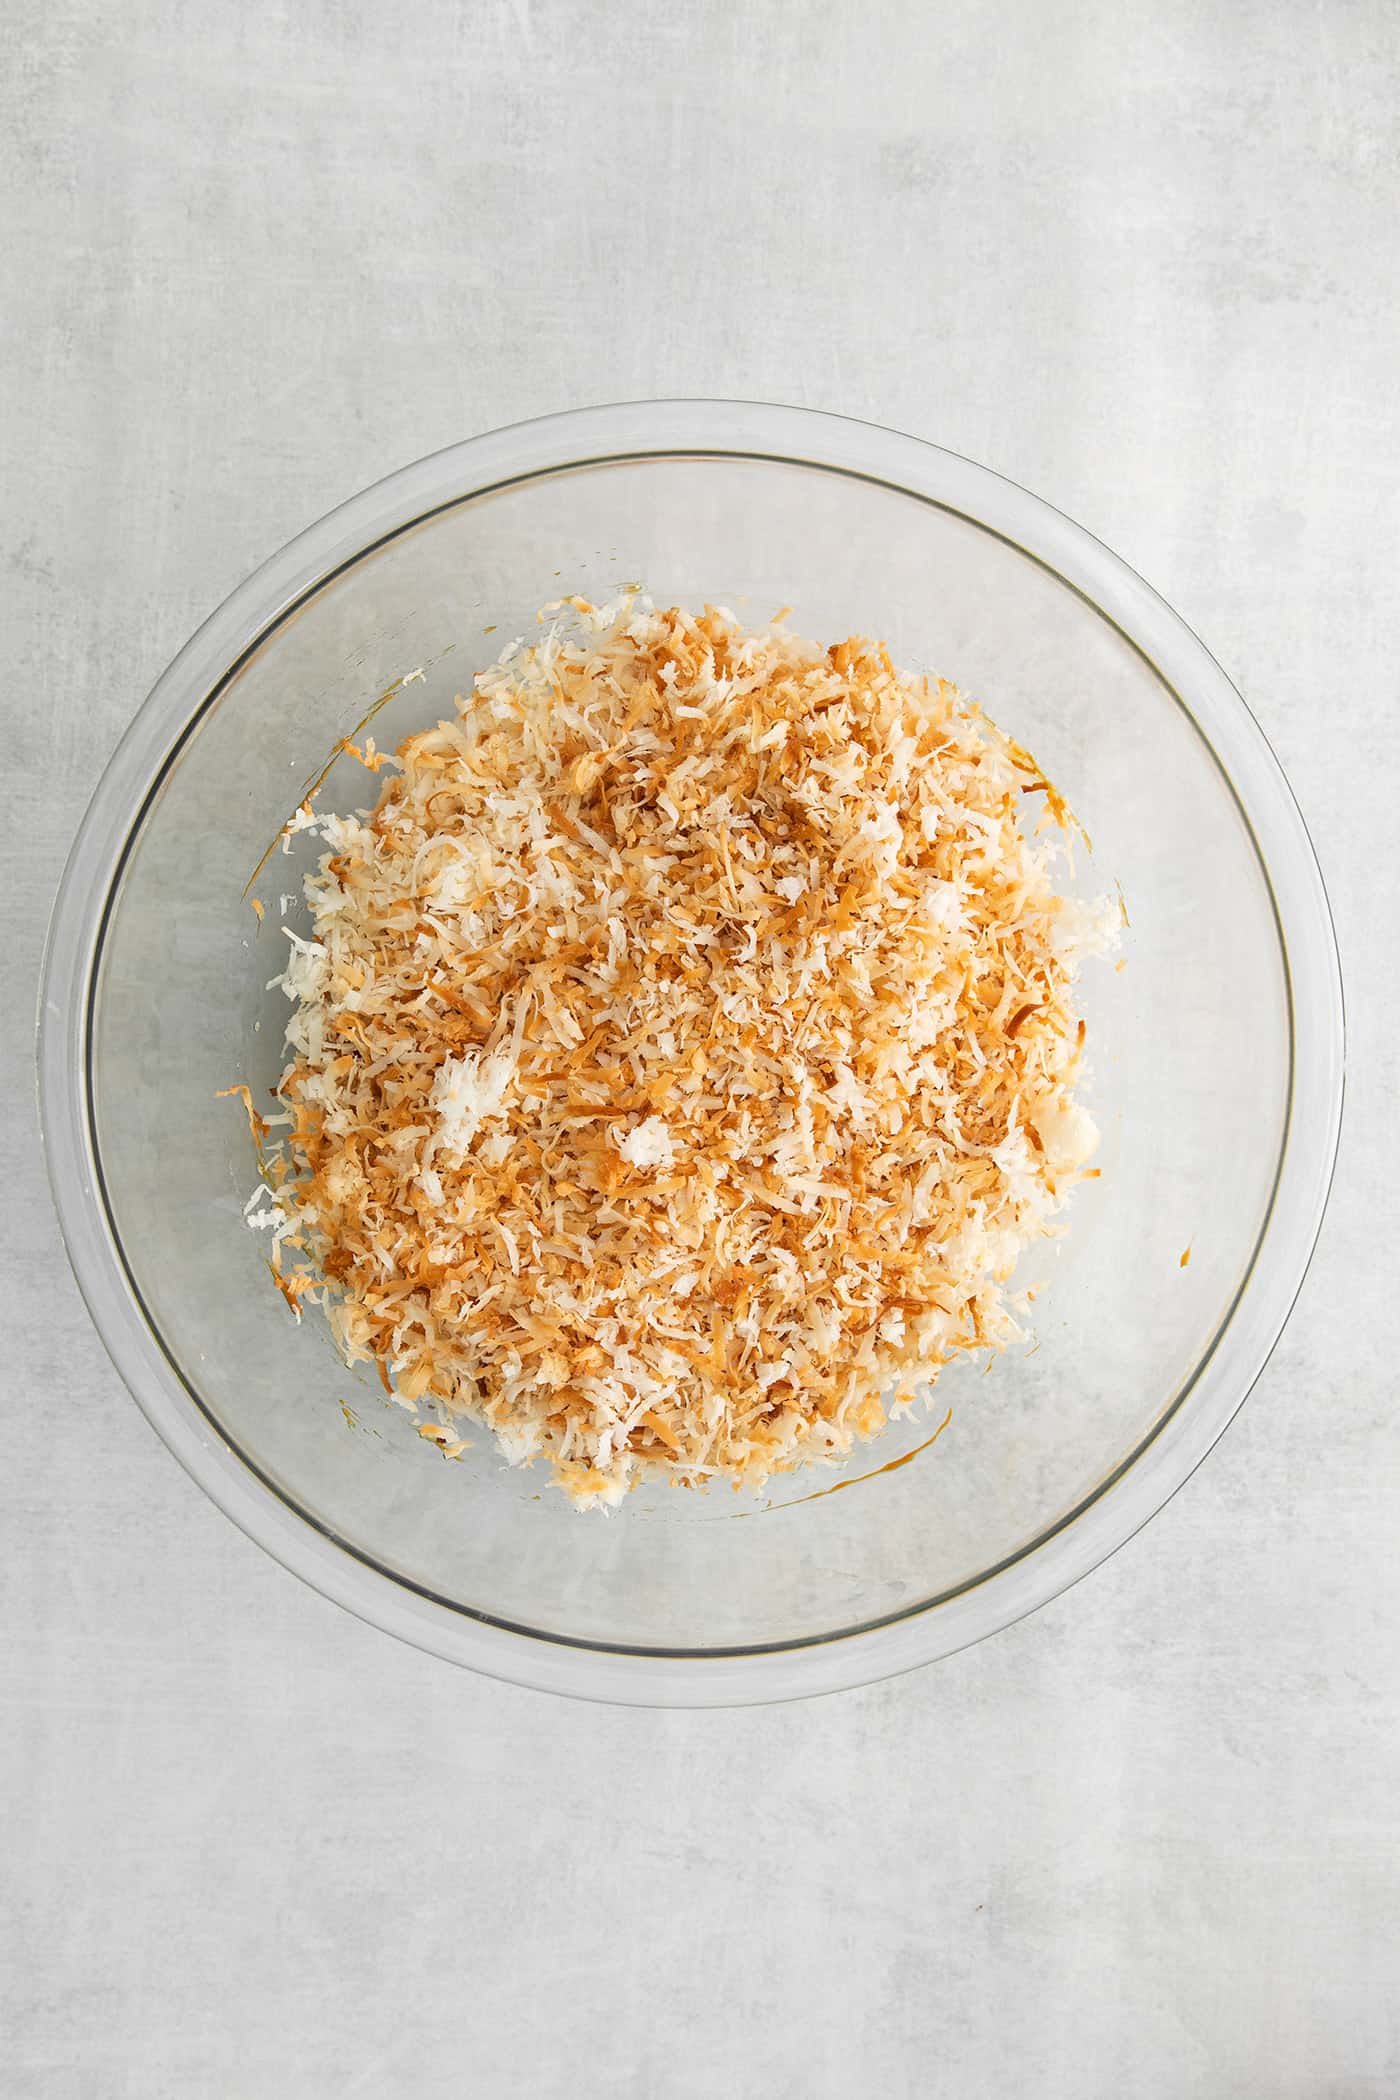 Toasted coconut in a bowl